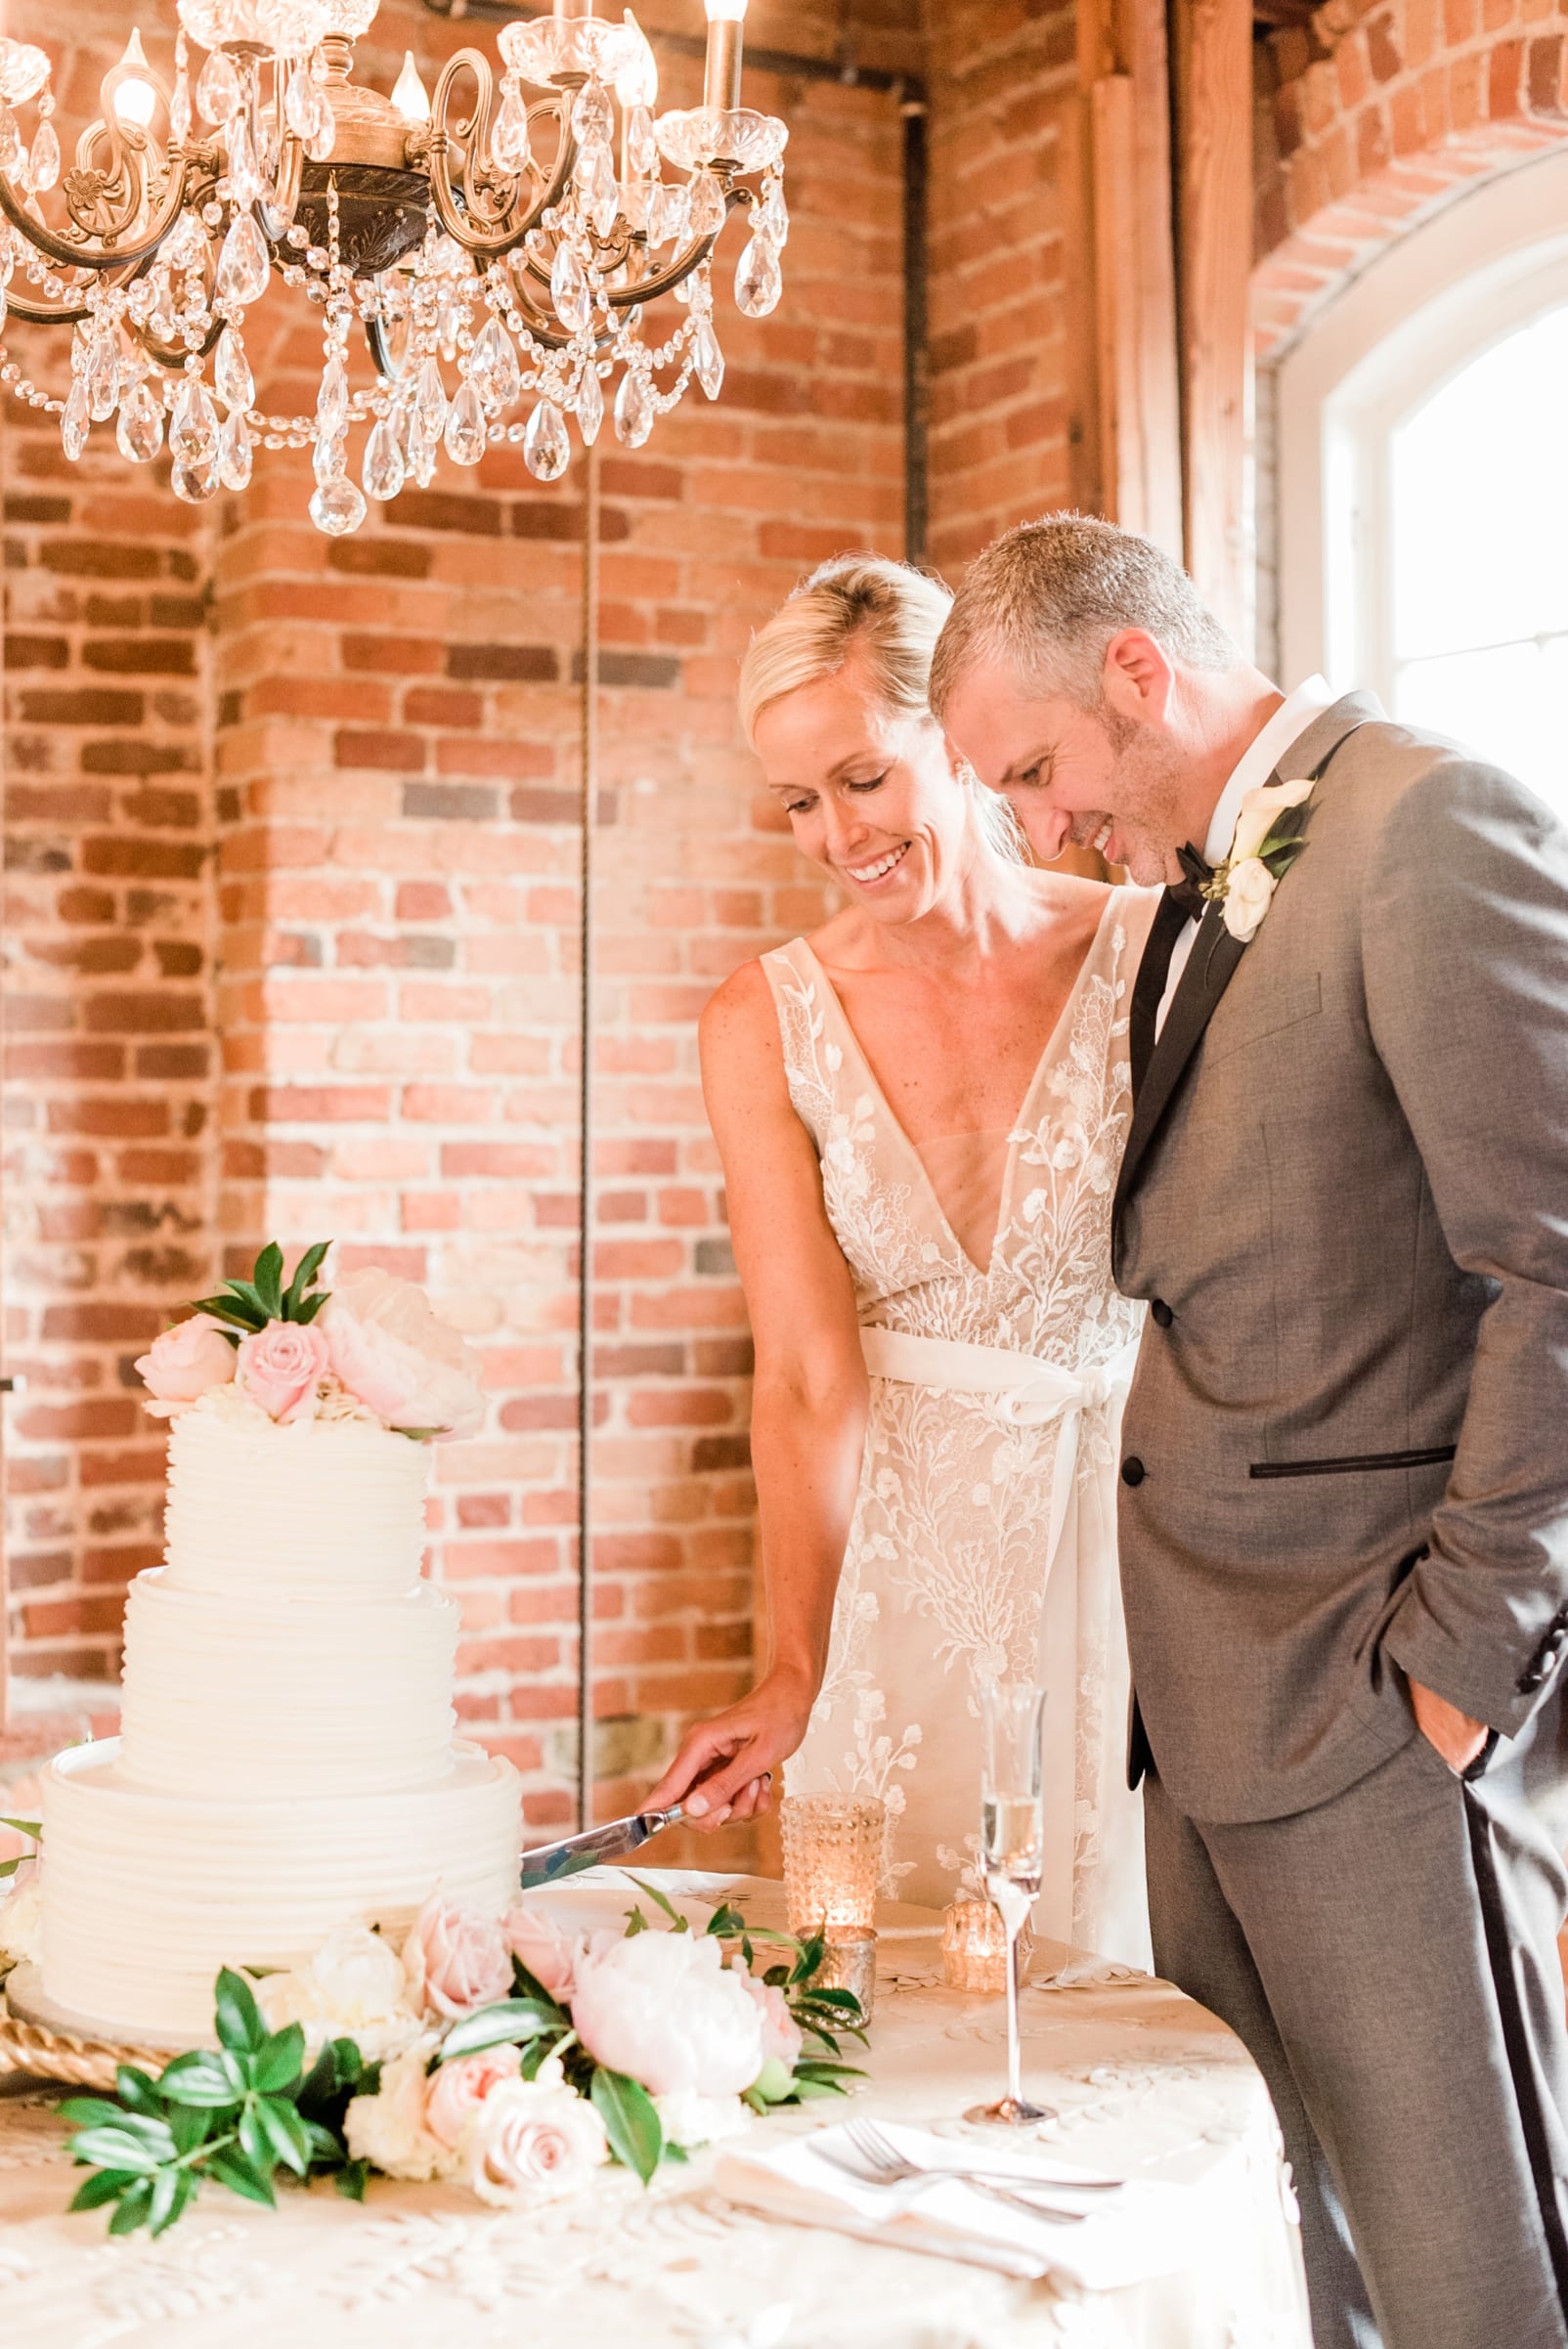 Melrose Knitting Mill bride and groom cutting the cake photo